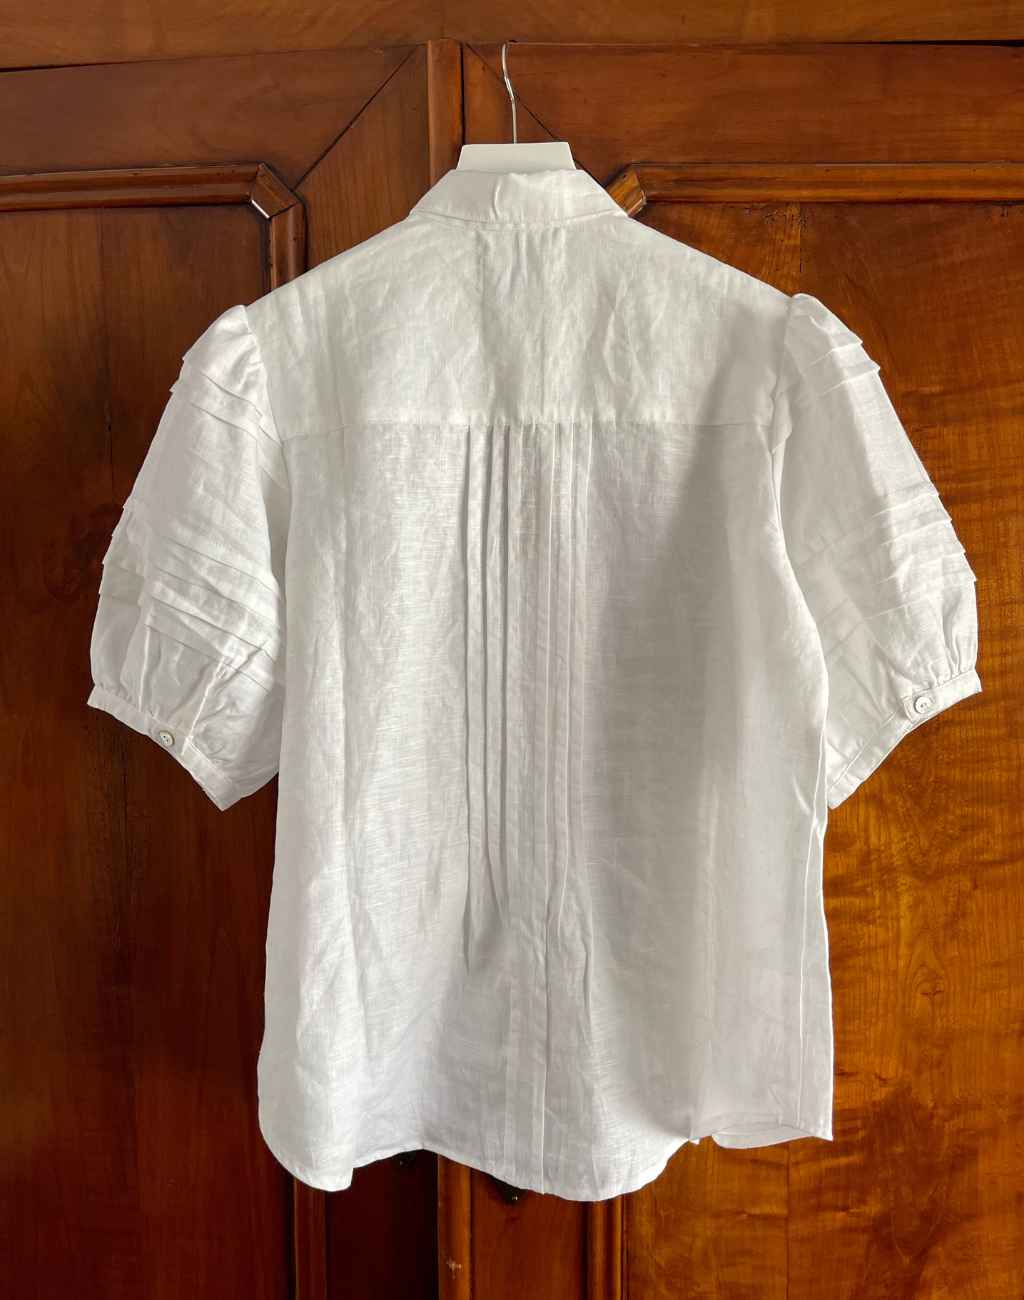 White Linen Top with Horizontal and Vertical Gathers - Visit Nifty LIDO 